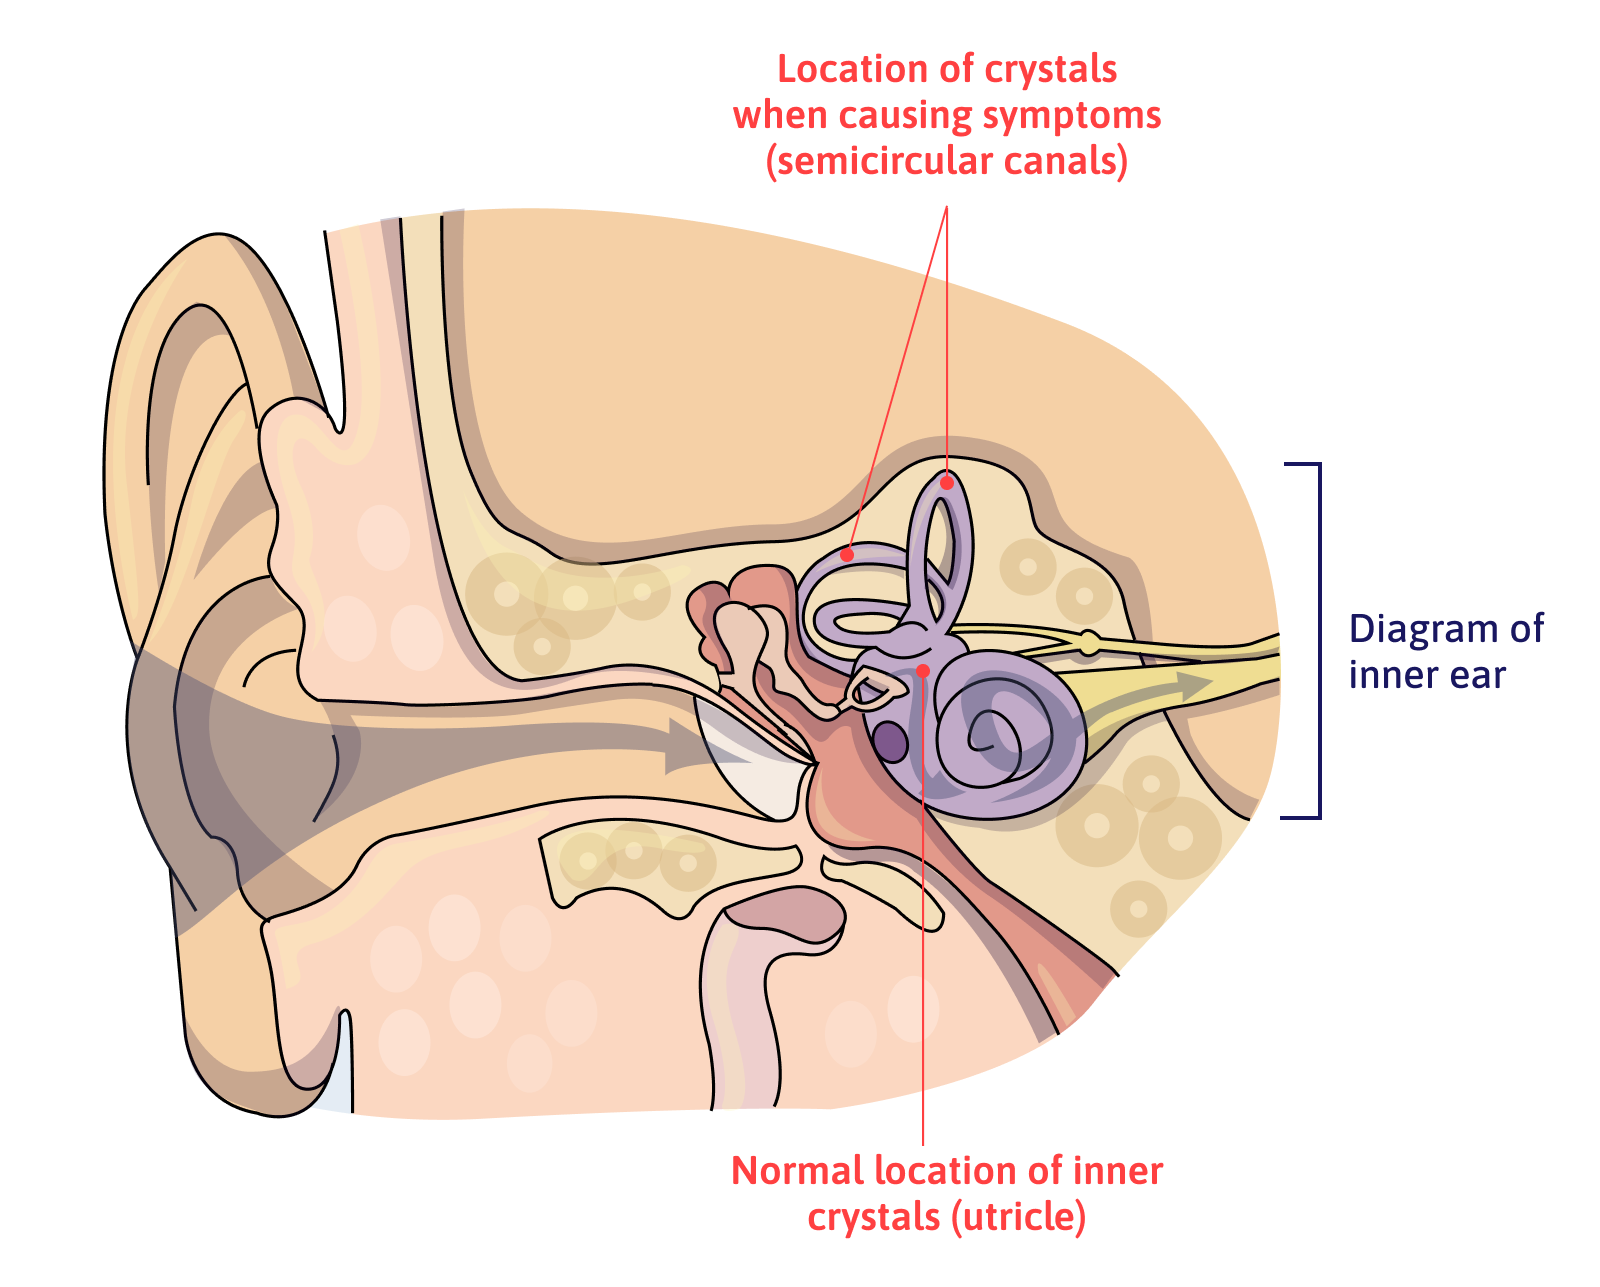 Diagram of the inner ear and the location of crystals